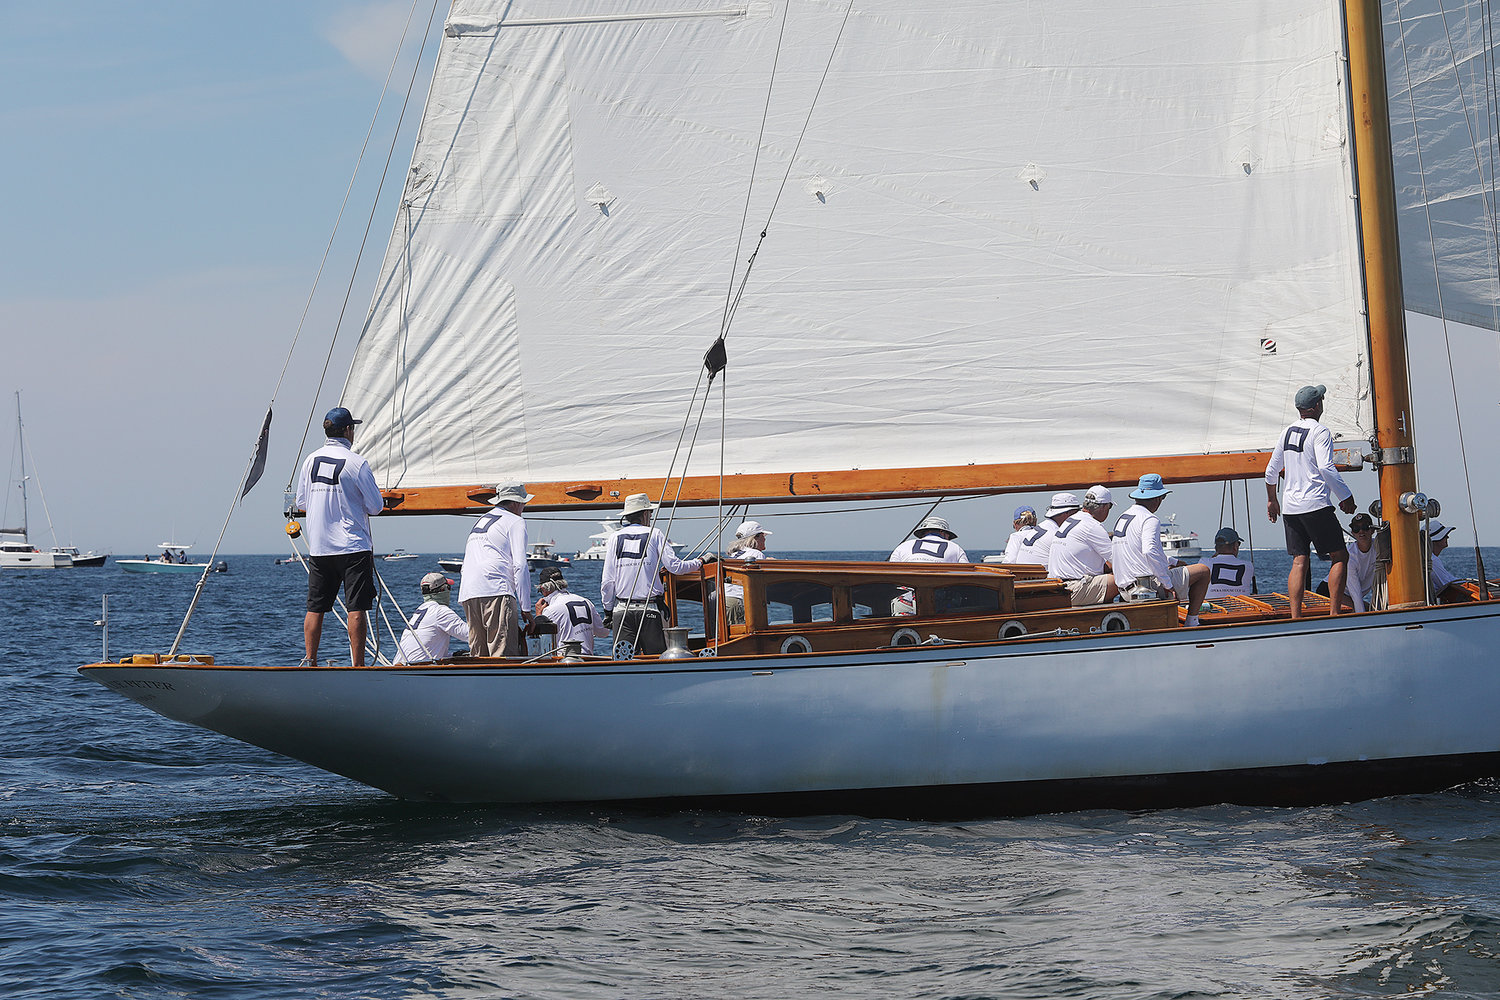 The crew of The Blue Peter at the start of the Opera House Cup race on Sunday in Nantucket Sound.